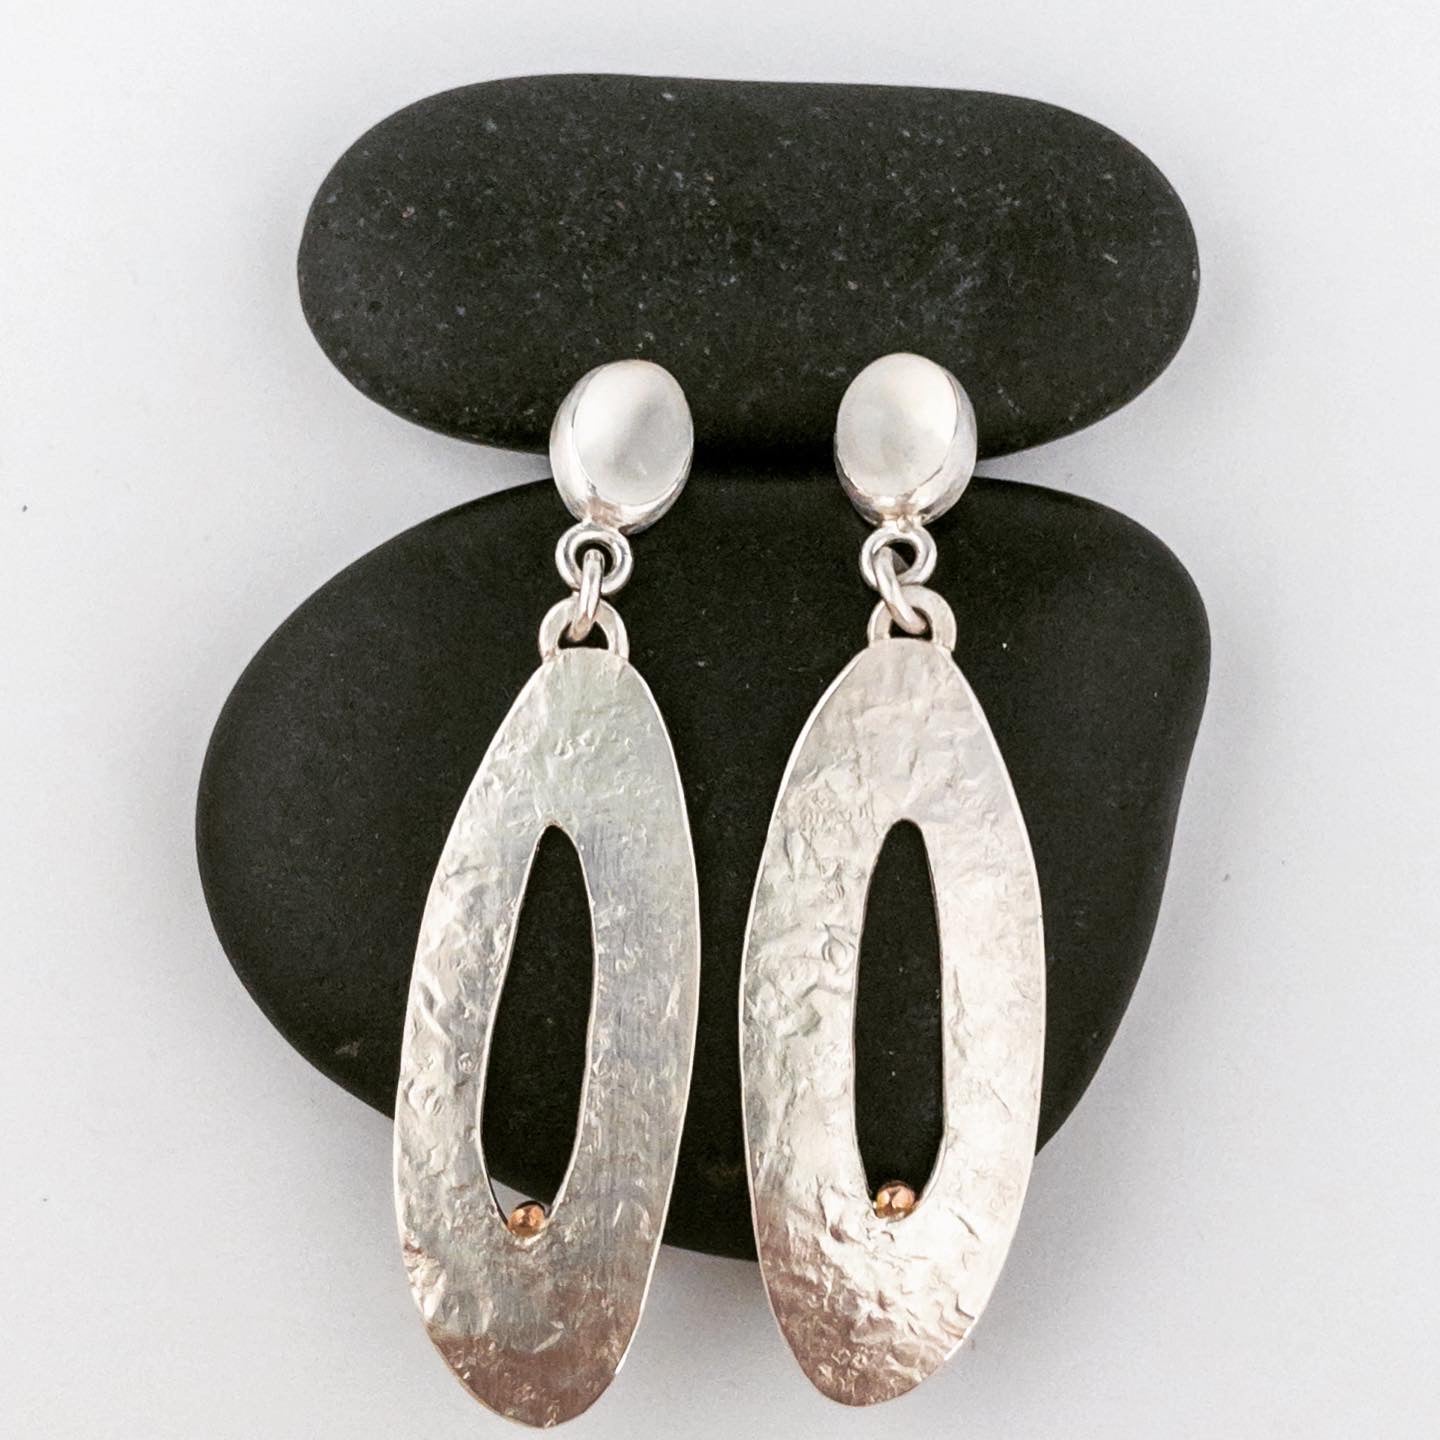 Oval moonstone earrings with gold detail